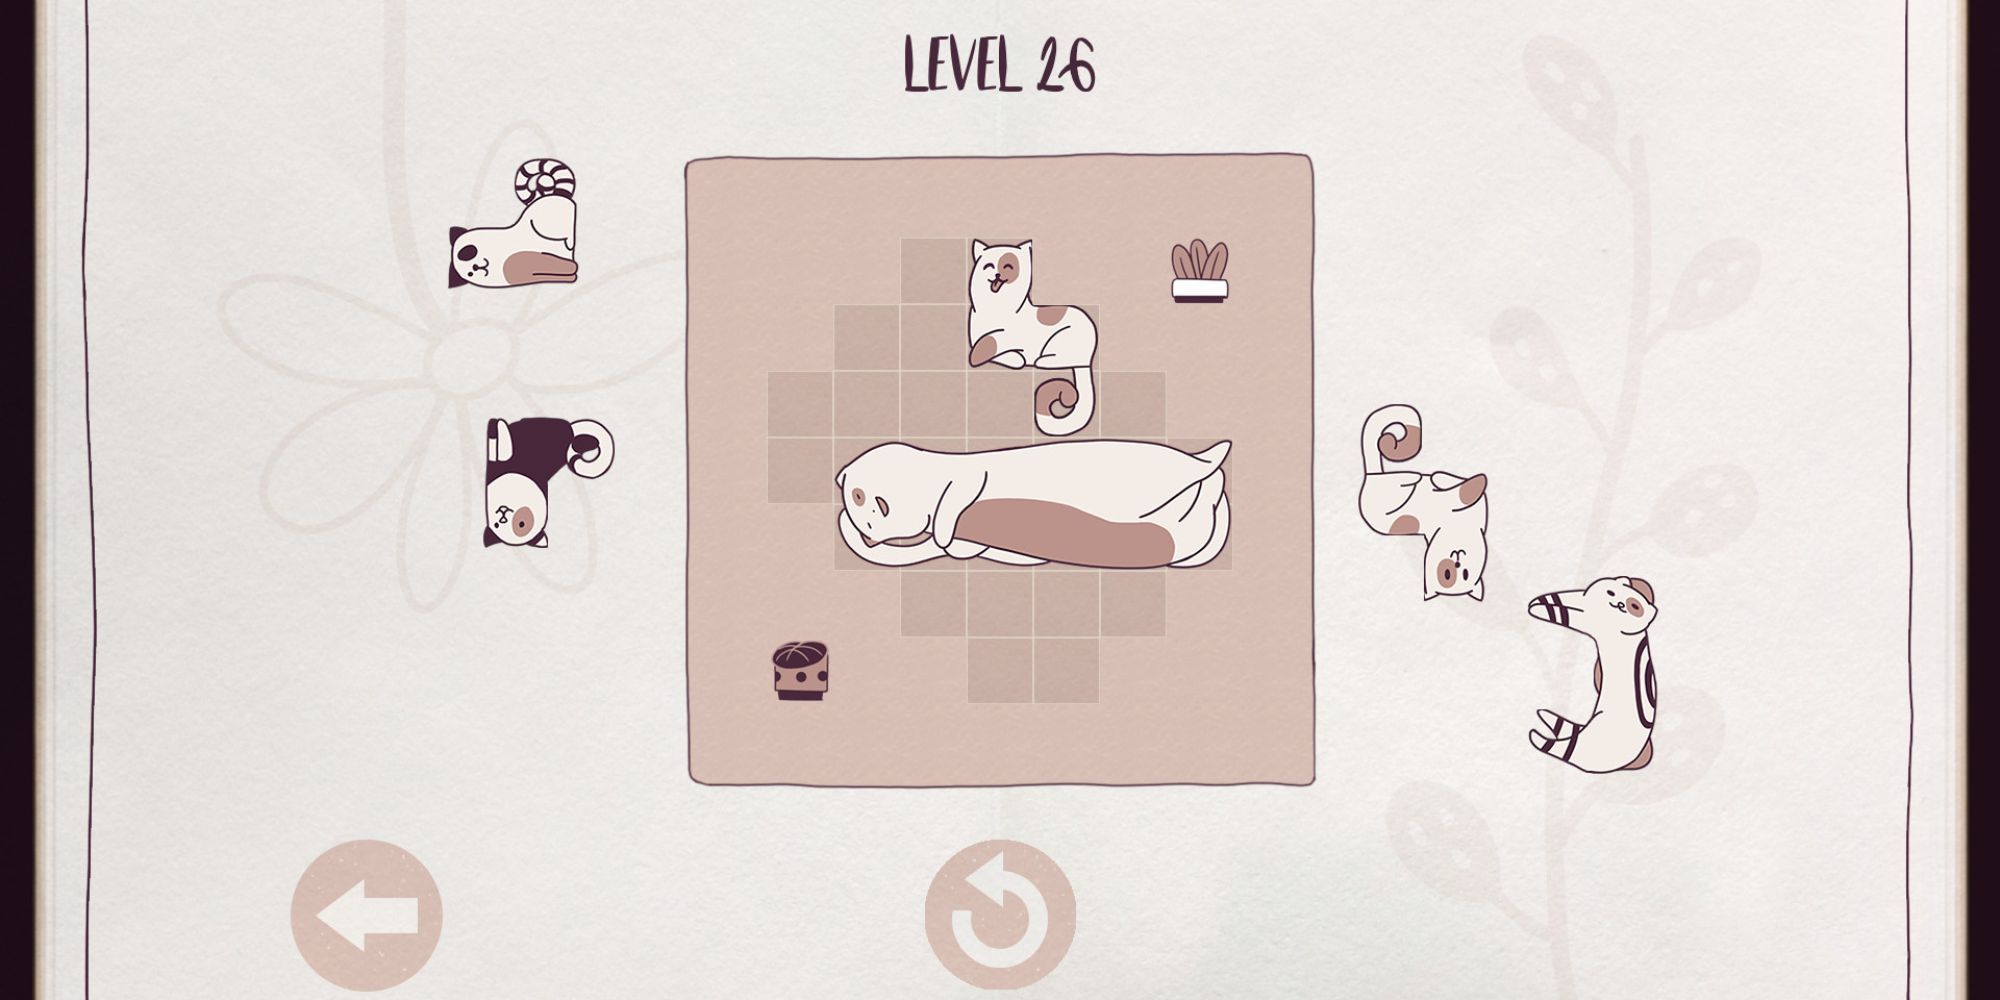 A player attempting to complete level 26 in Cats Organized Neatly